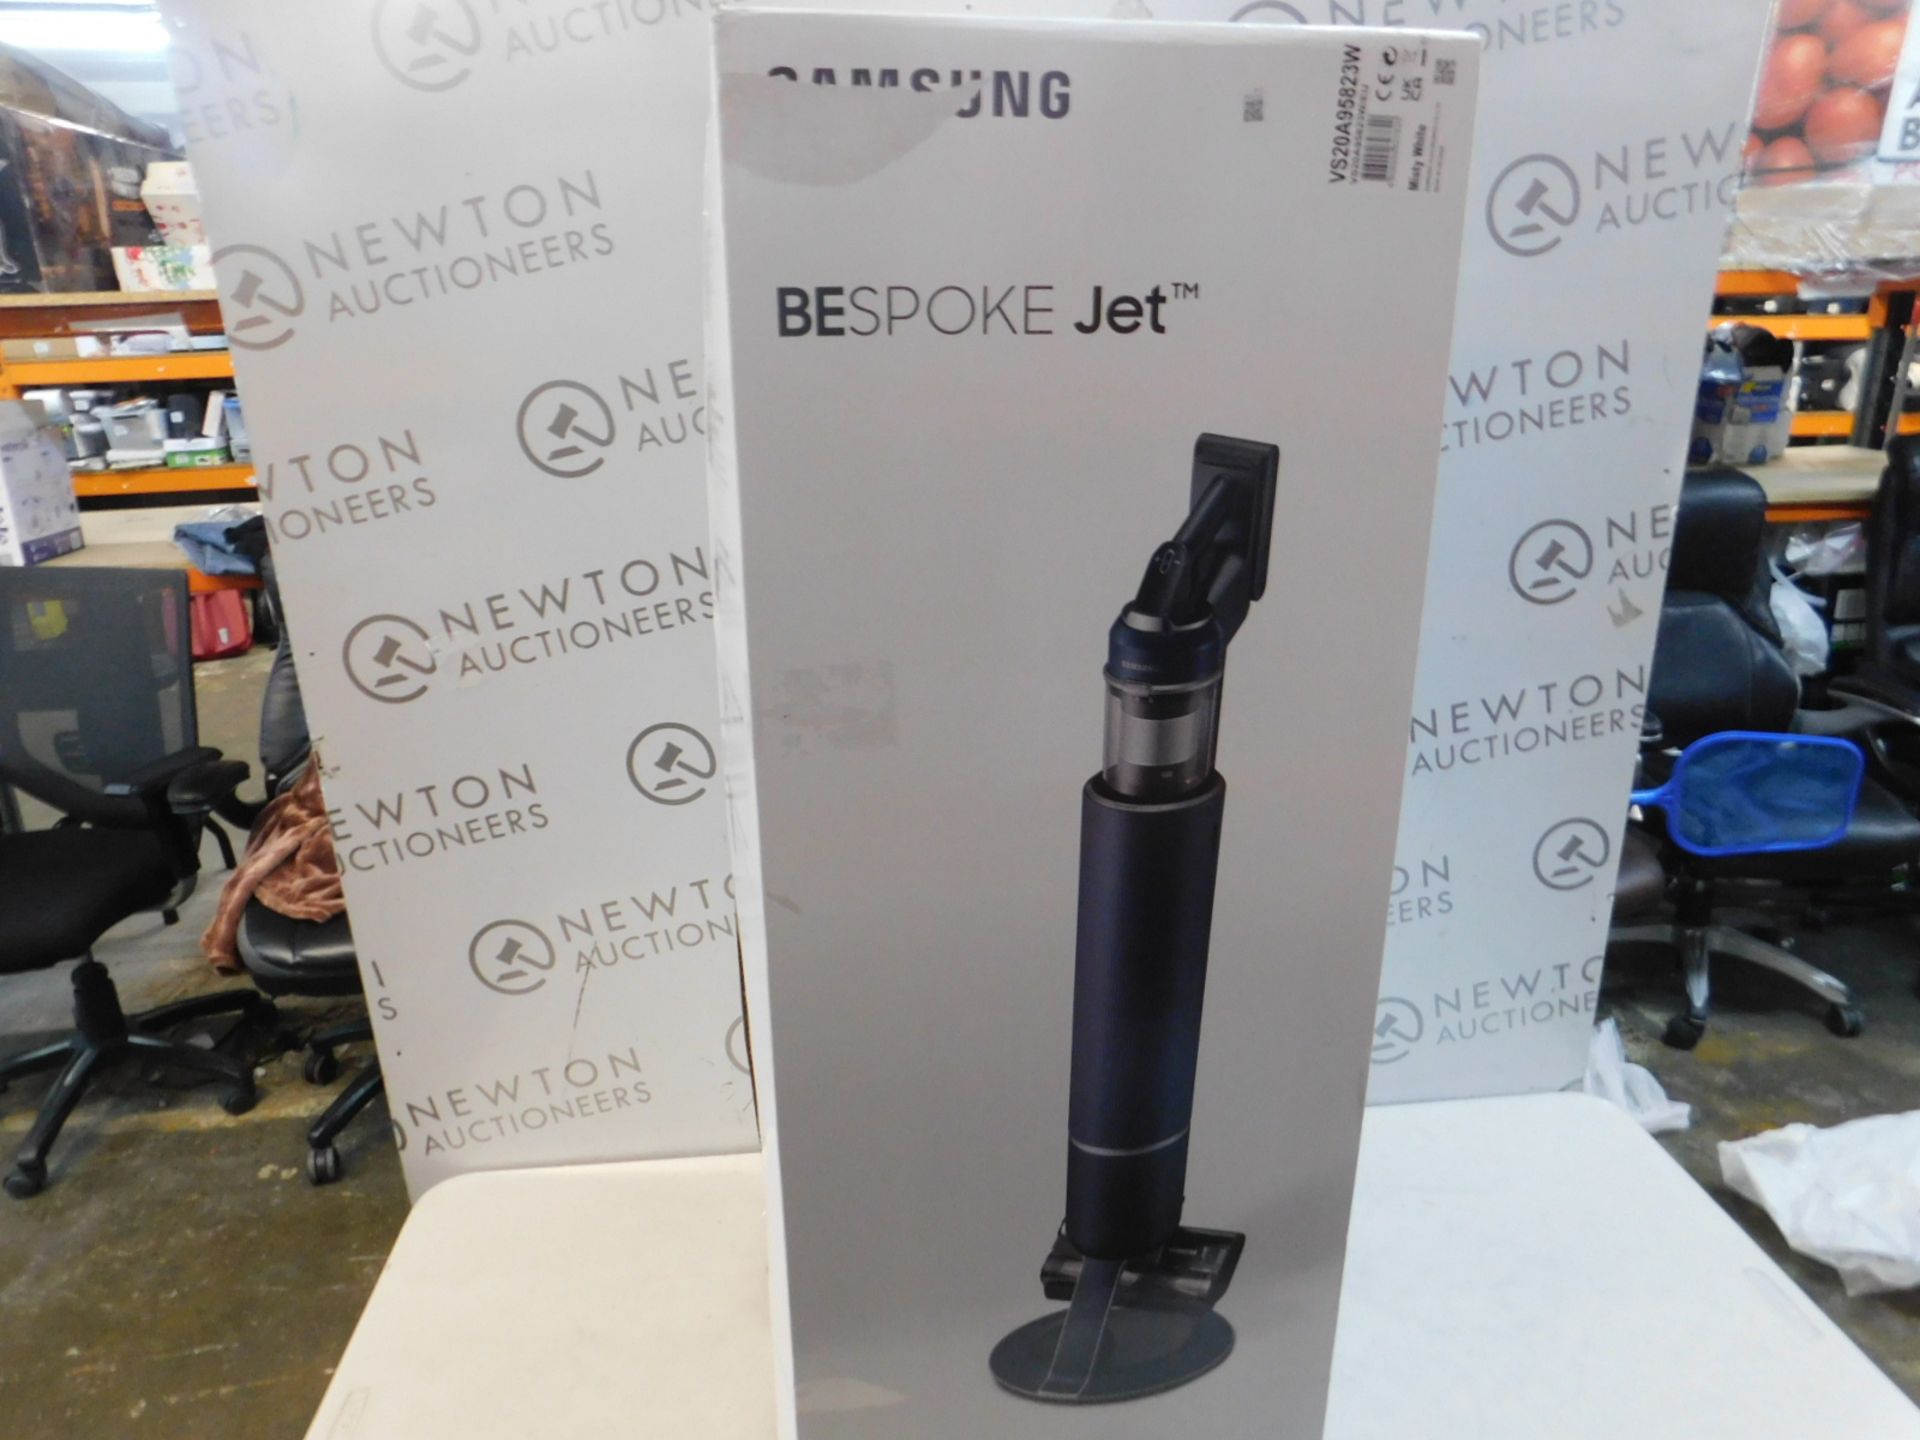 1 BOXED SAMSUNG BESPOKE JETâ„¢ ONE PET CORDLESS VACUUM CLEANER WITH UP TO 60 MINUTES RUN TIME RRP